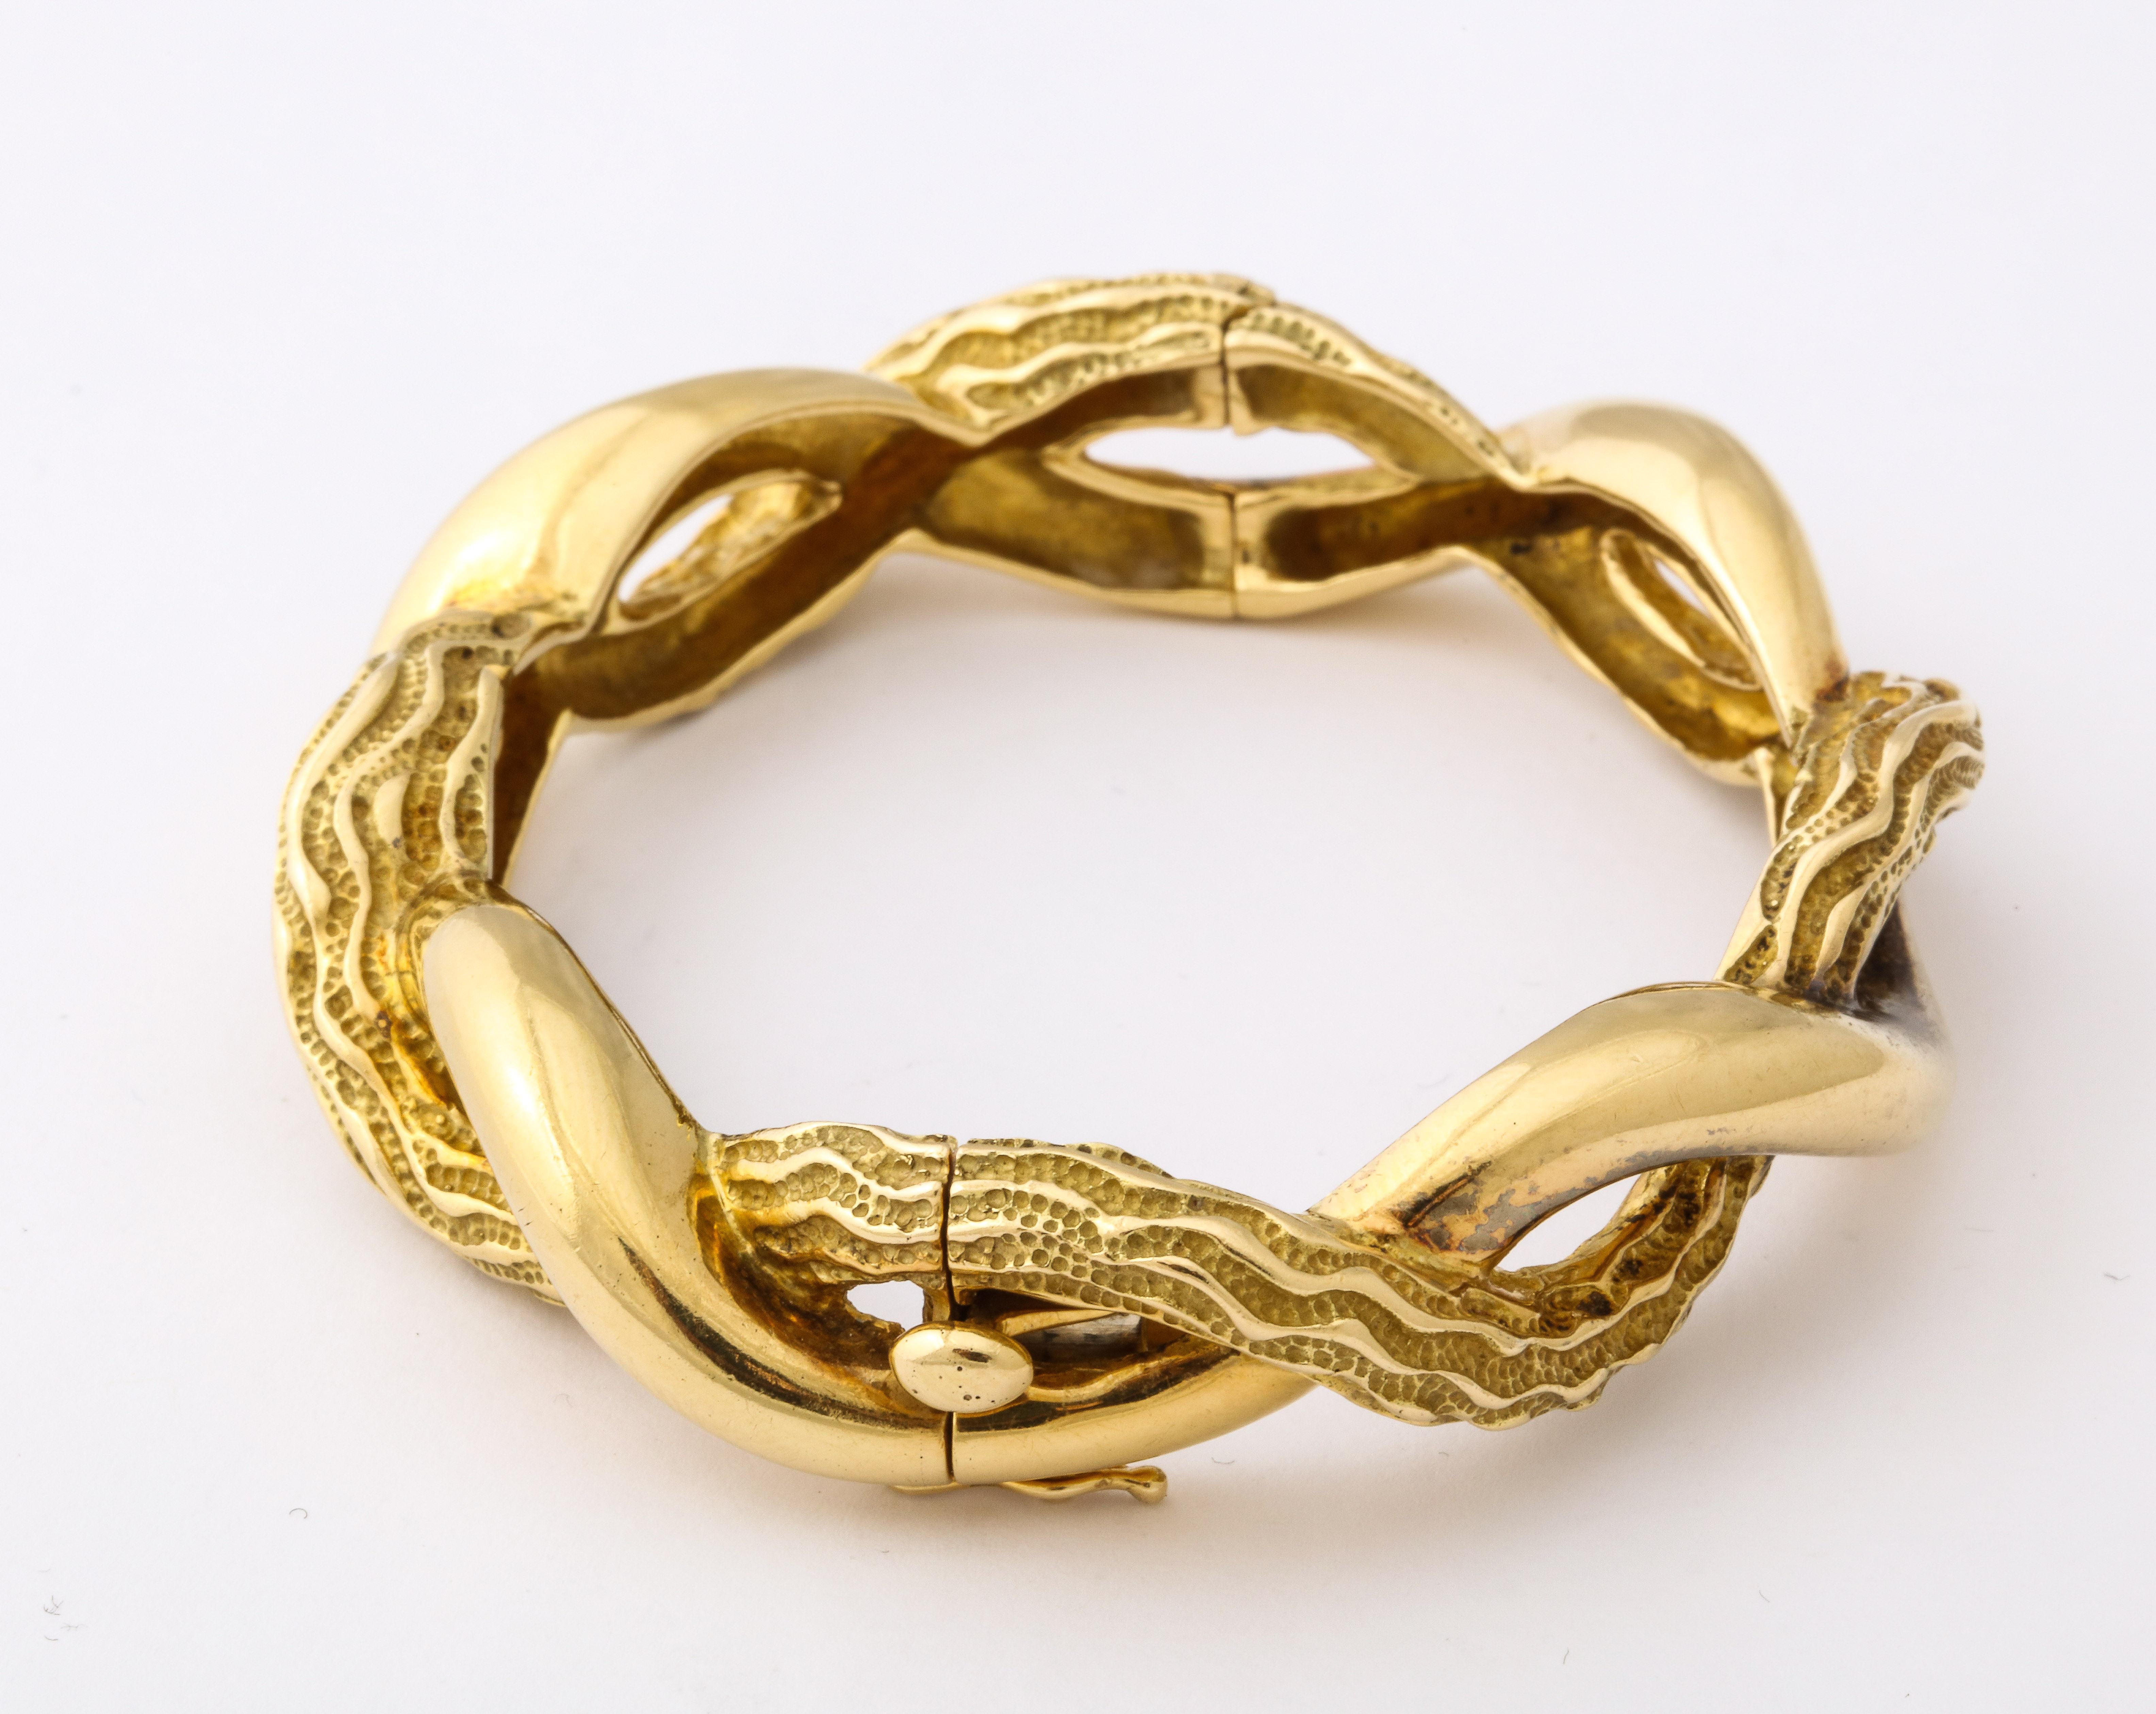 1970s Tiffany & Co. Textured Gold Bangle Bracelet In Excellent Condition For Sale In New York, NY